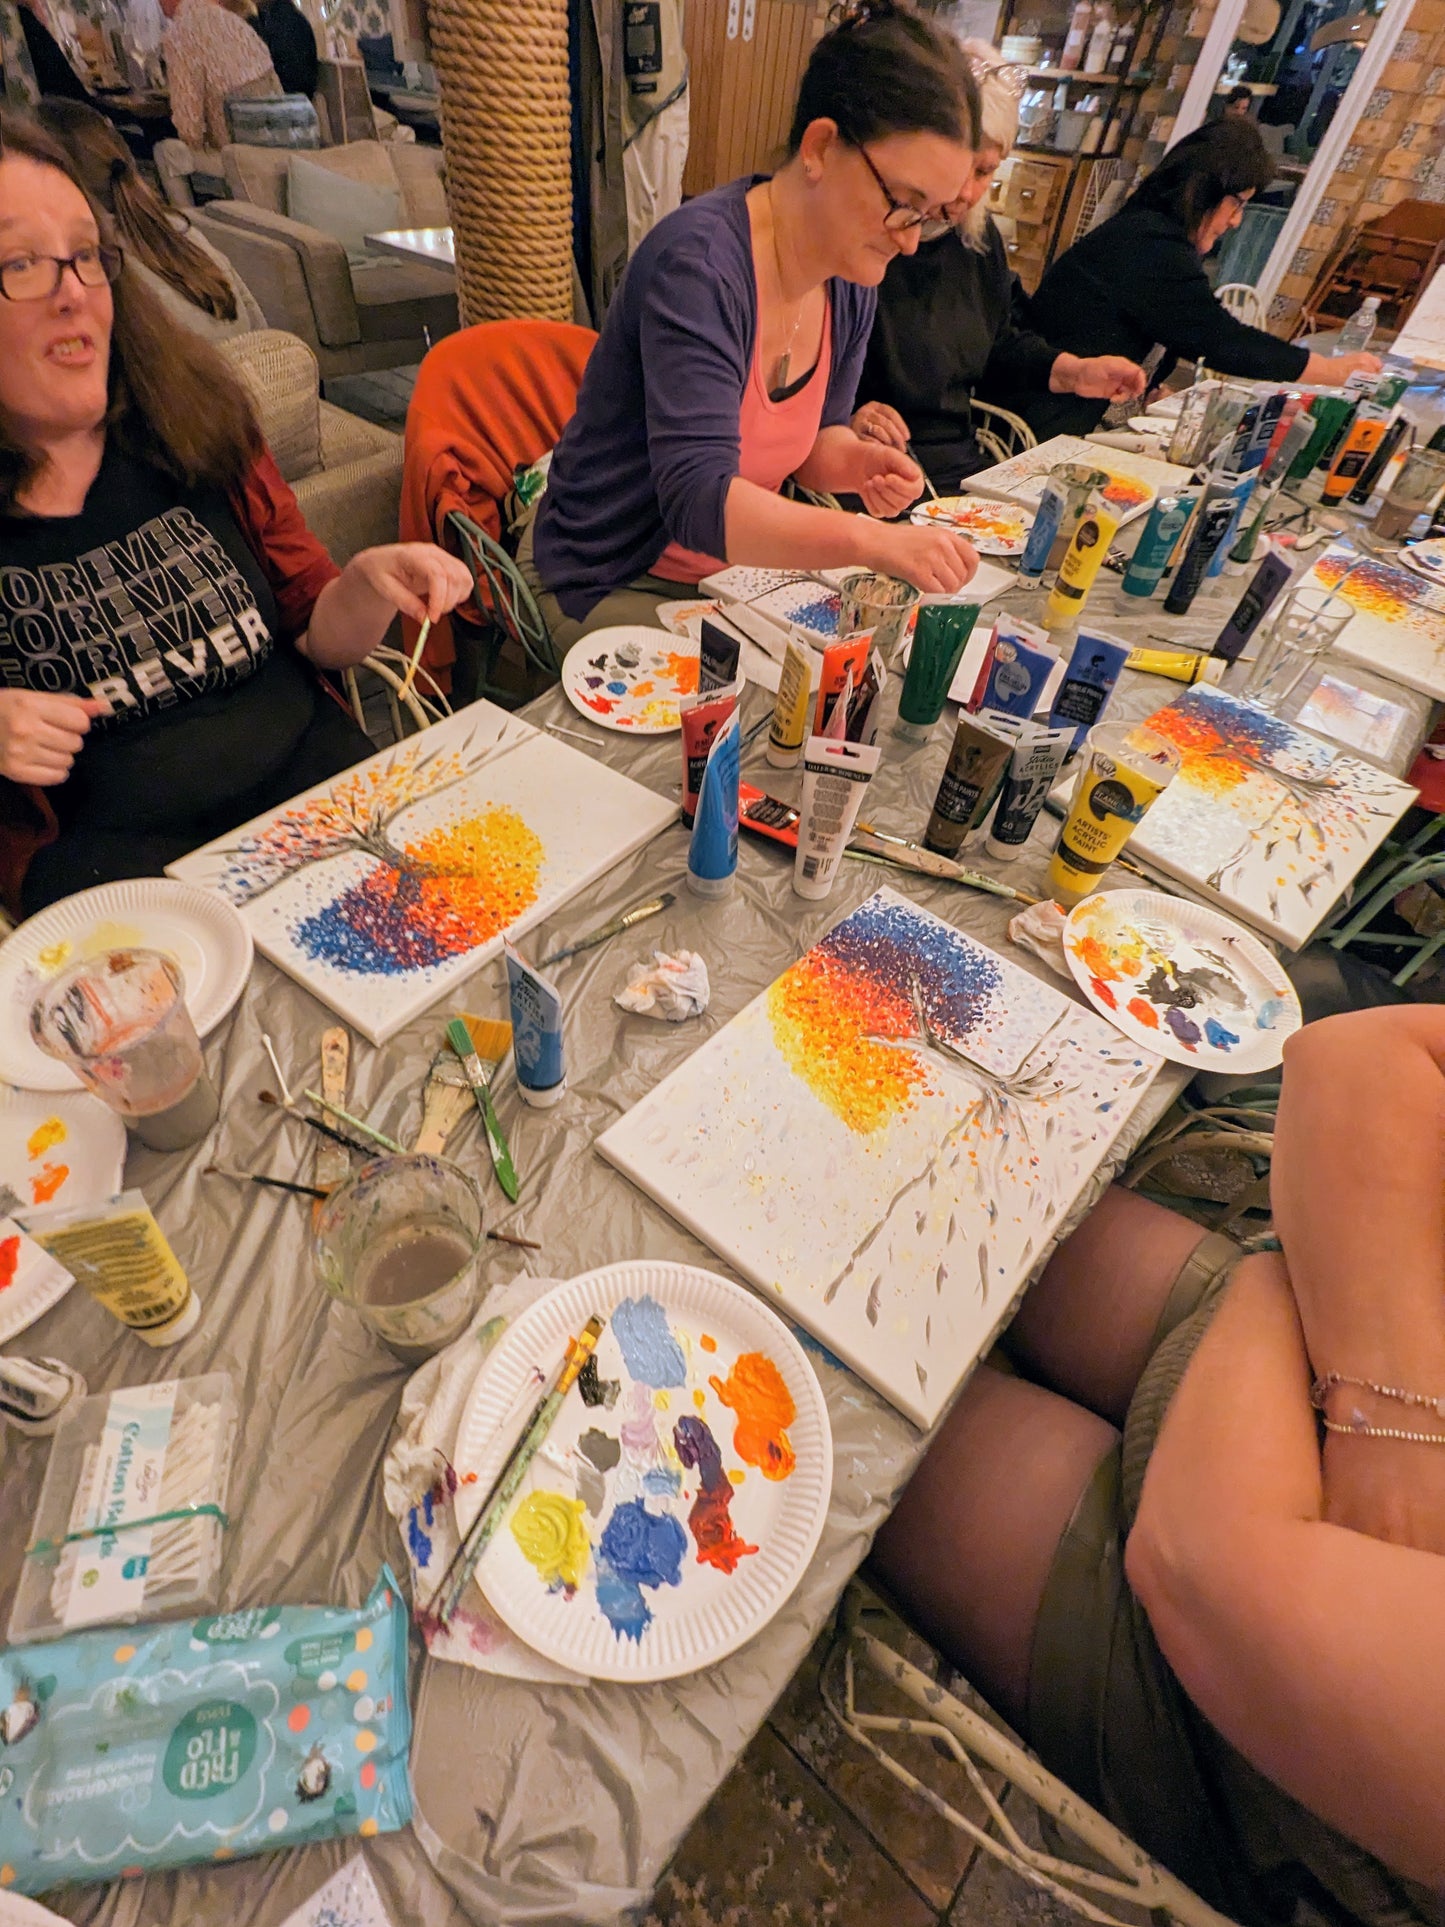 CORPORATE PAINTING WORKSHOP - Team building event at your place of work!